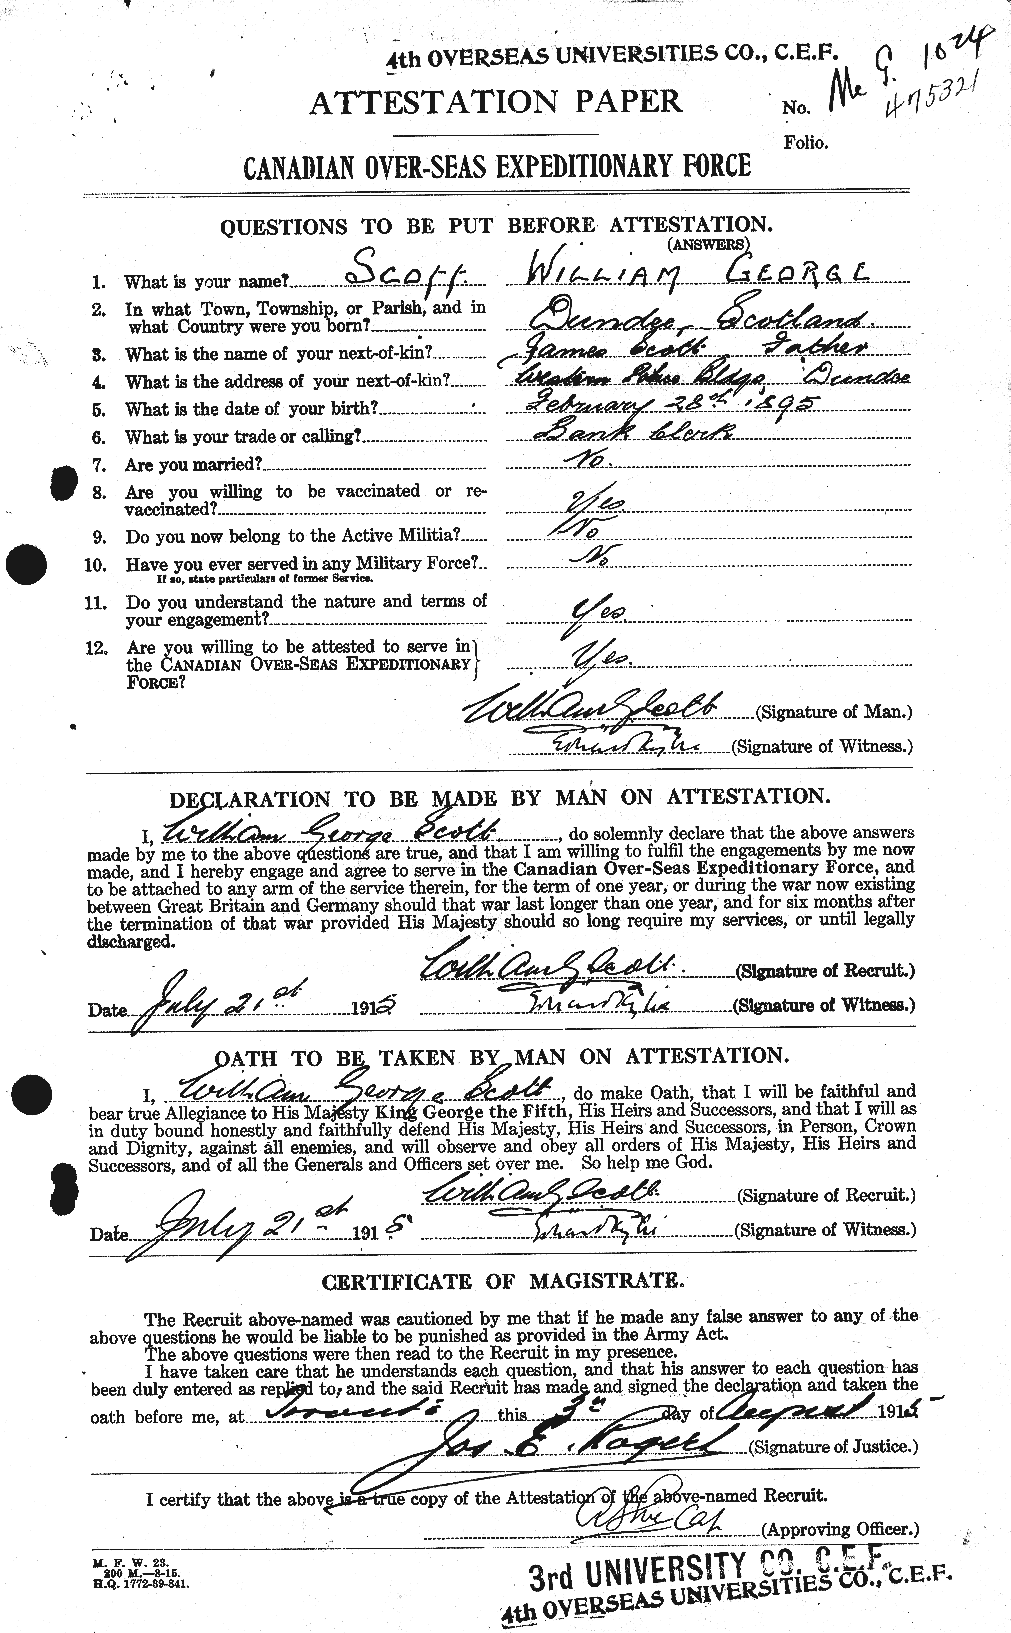 Personnel Records of the First World War - CEF 087017a